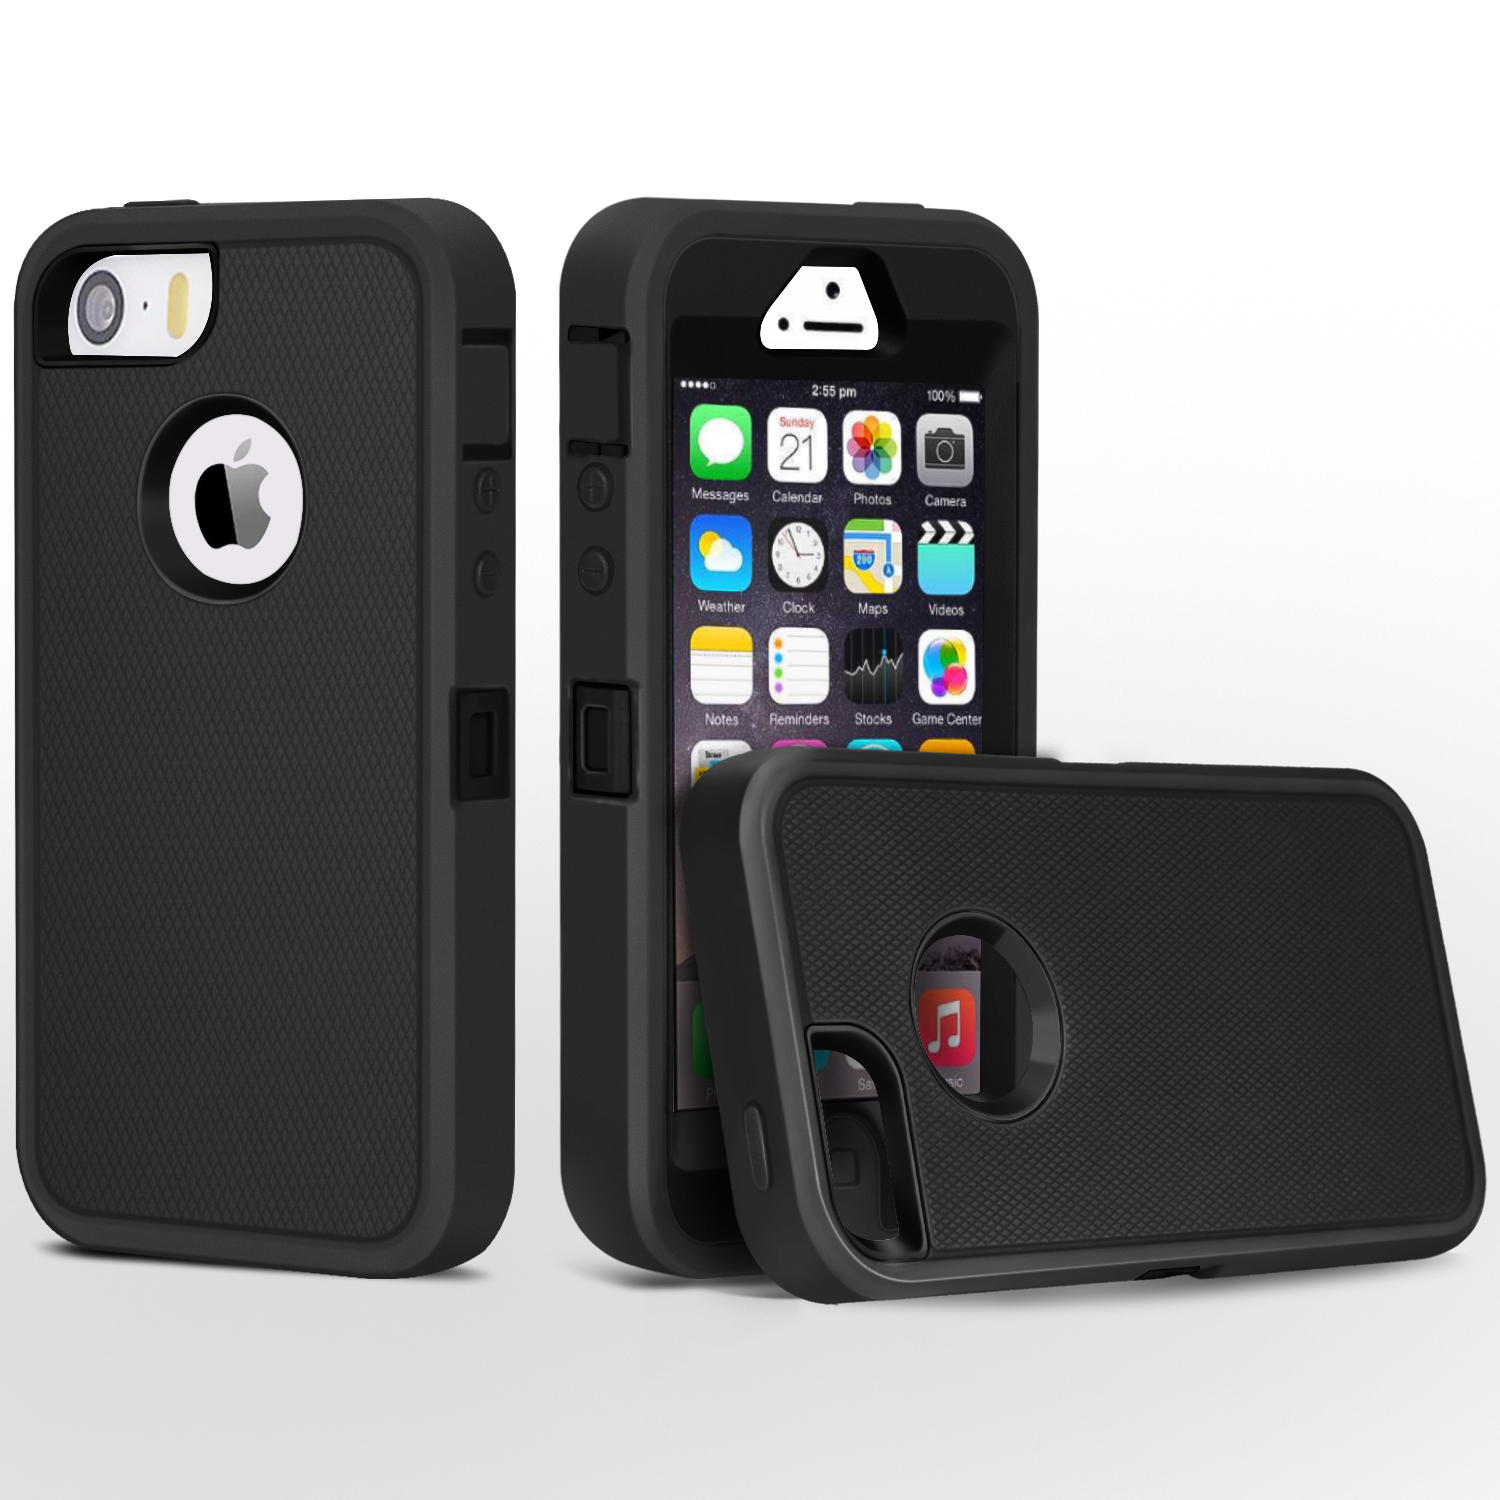 iPhone 5 Case, FogeekHeavy Duty PC + TPU Combo Protective Defender Body Armor Case for iPhone 5 & iPhone 5S(Black) …